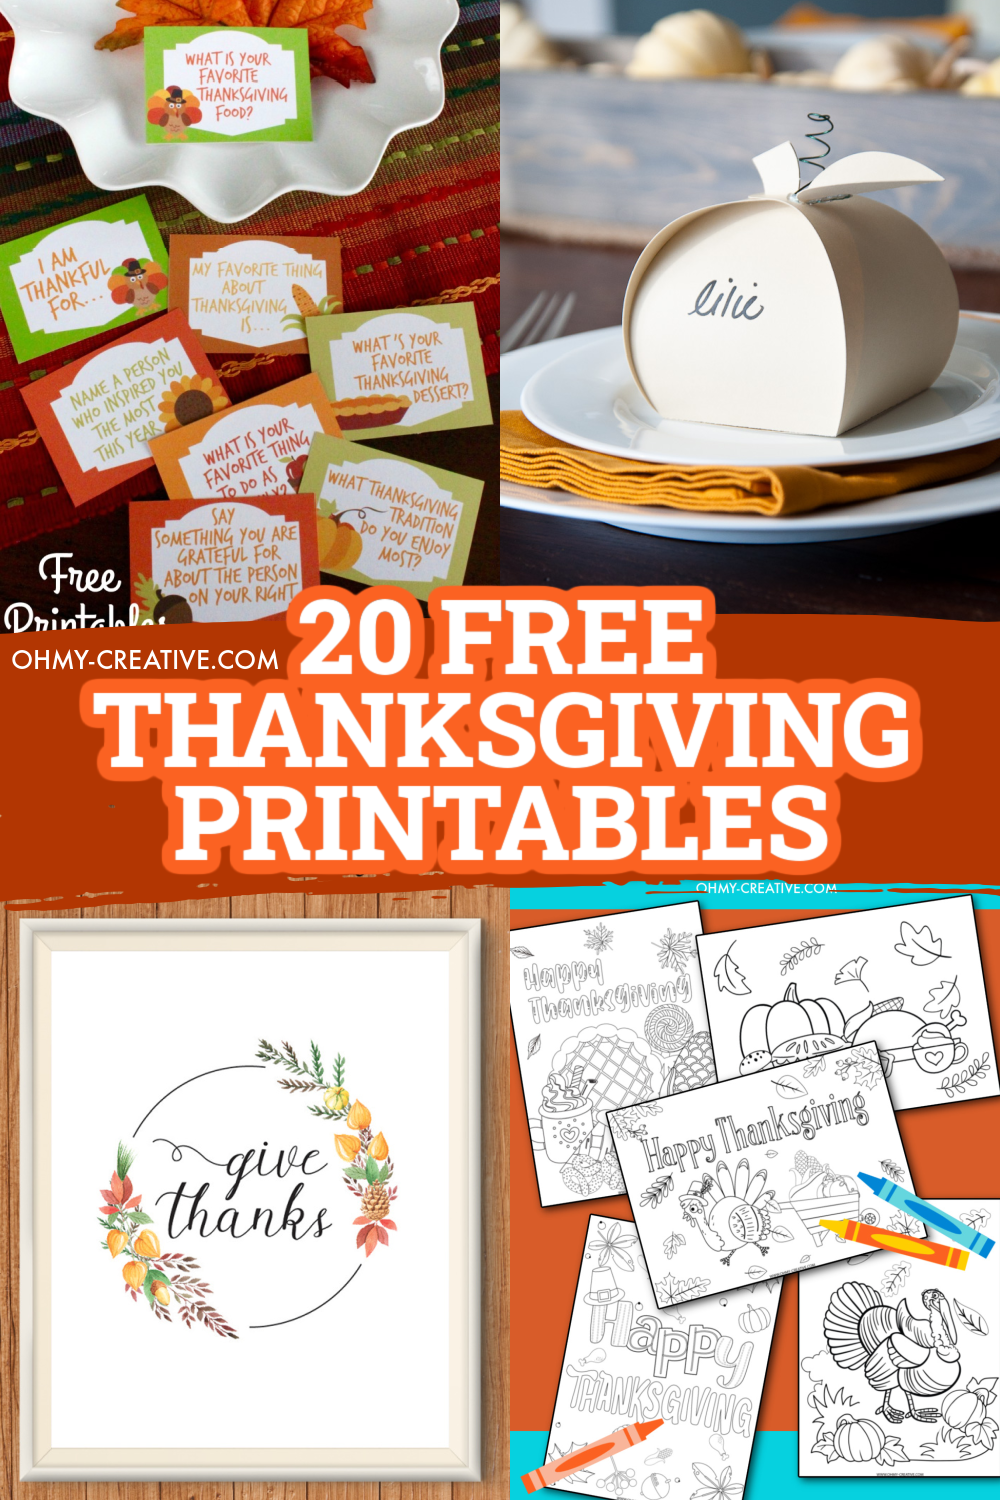 A collage of free Thanksgiving printables including conversation cards, decorations and Thanksgiving coloring pages.